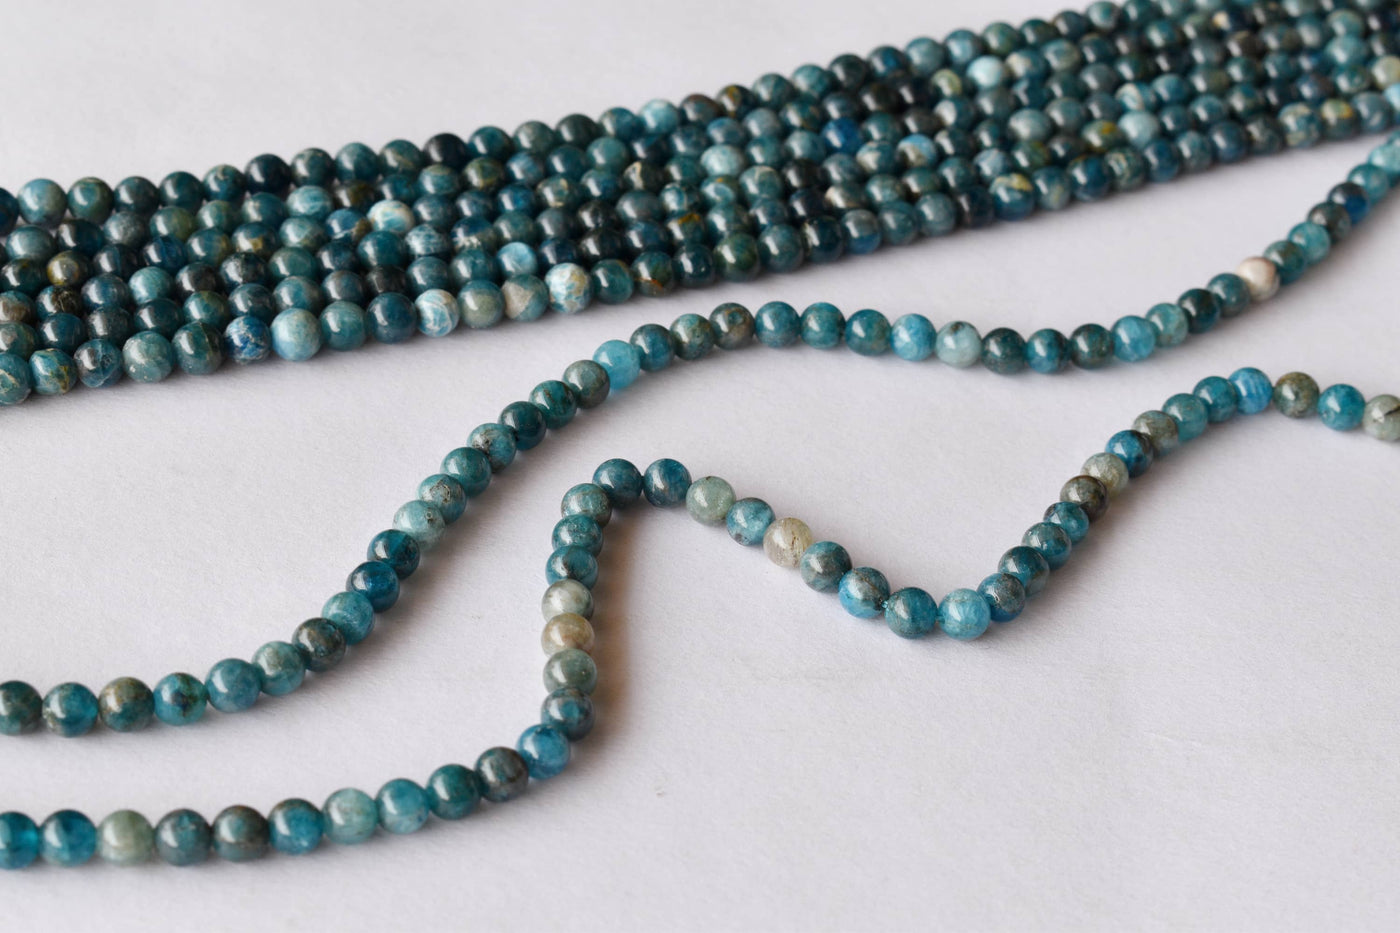 Apatite AAA Grade 6mm, 8mm, 10mm Perles rondes 